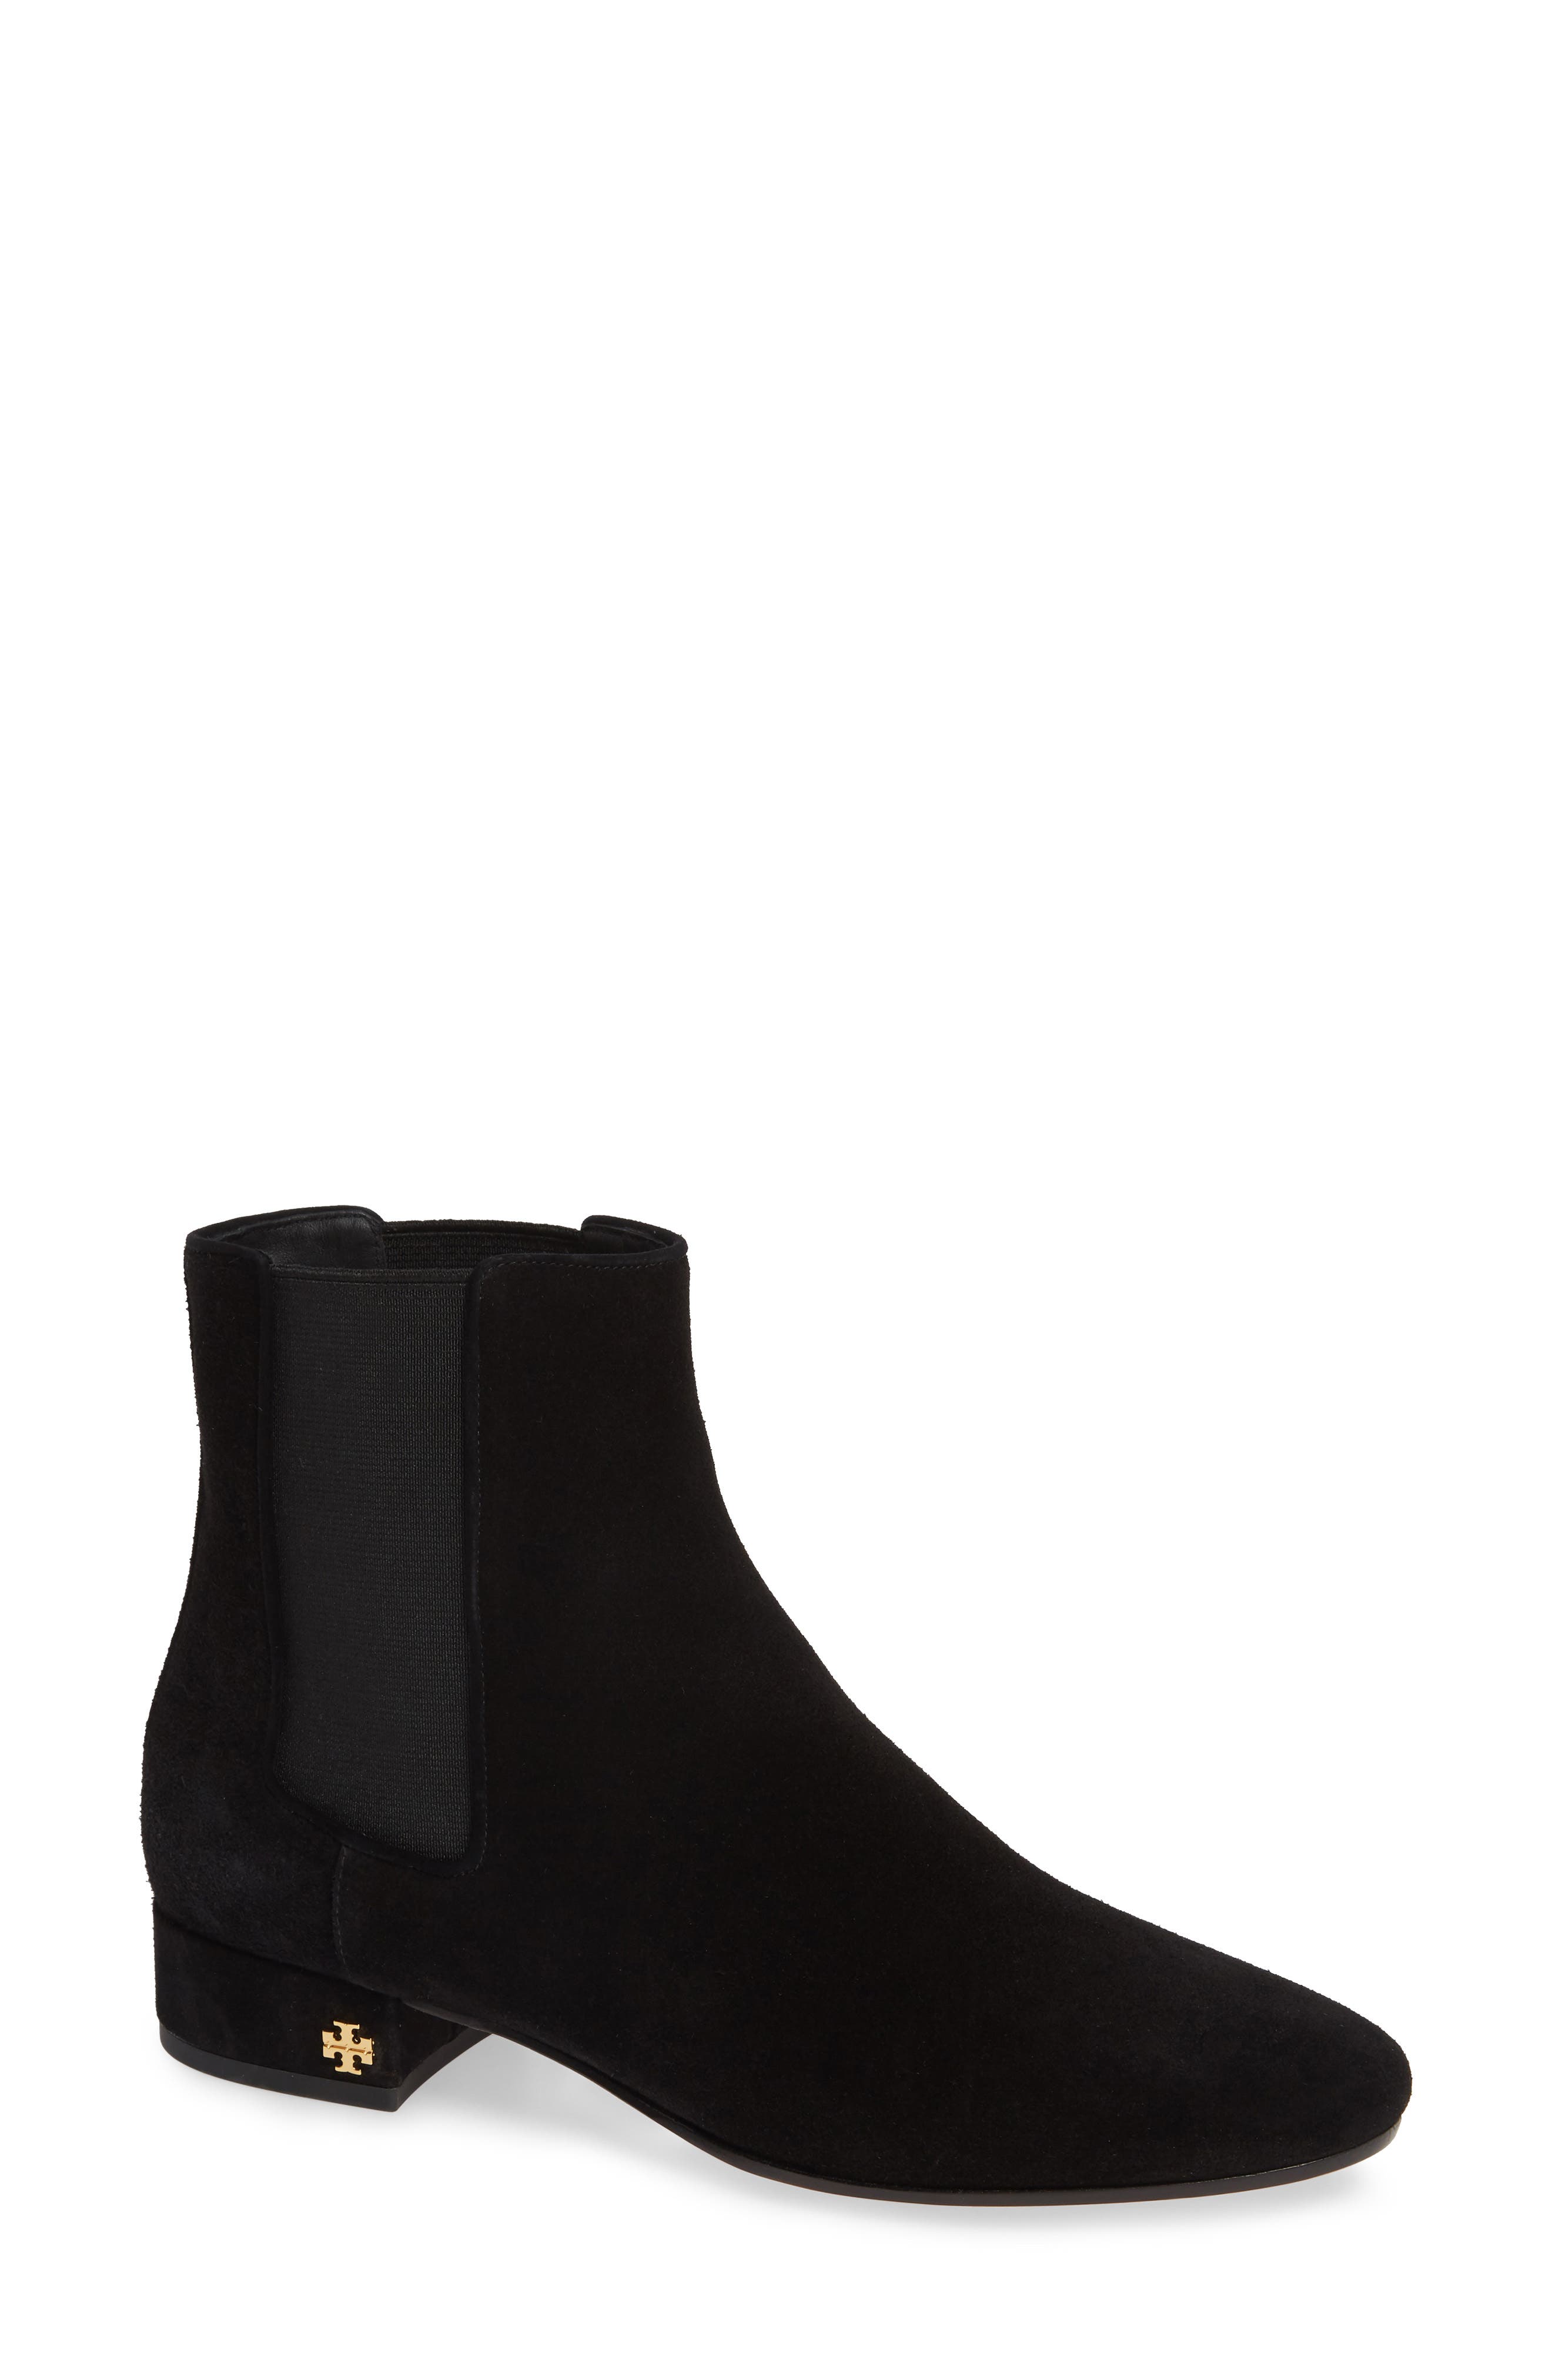 tory burch pascal chelsea boot